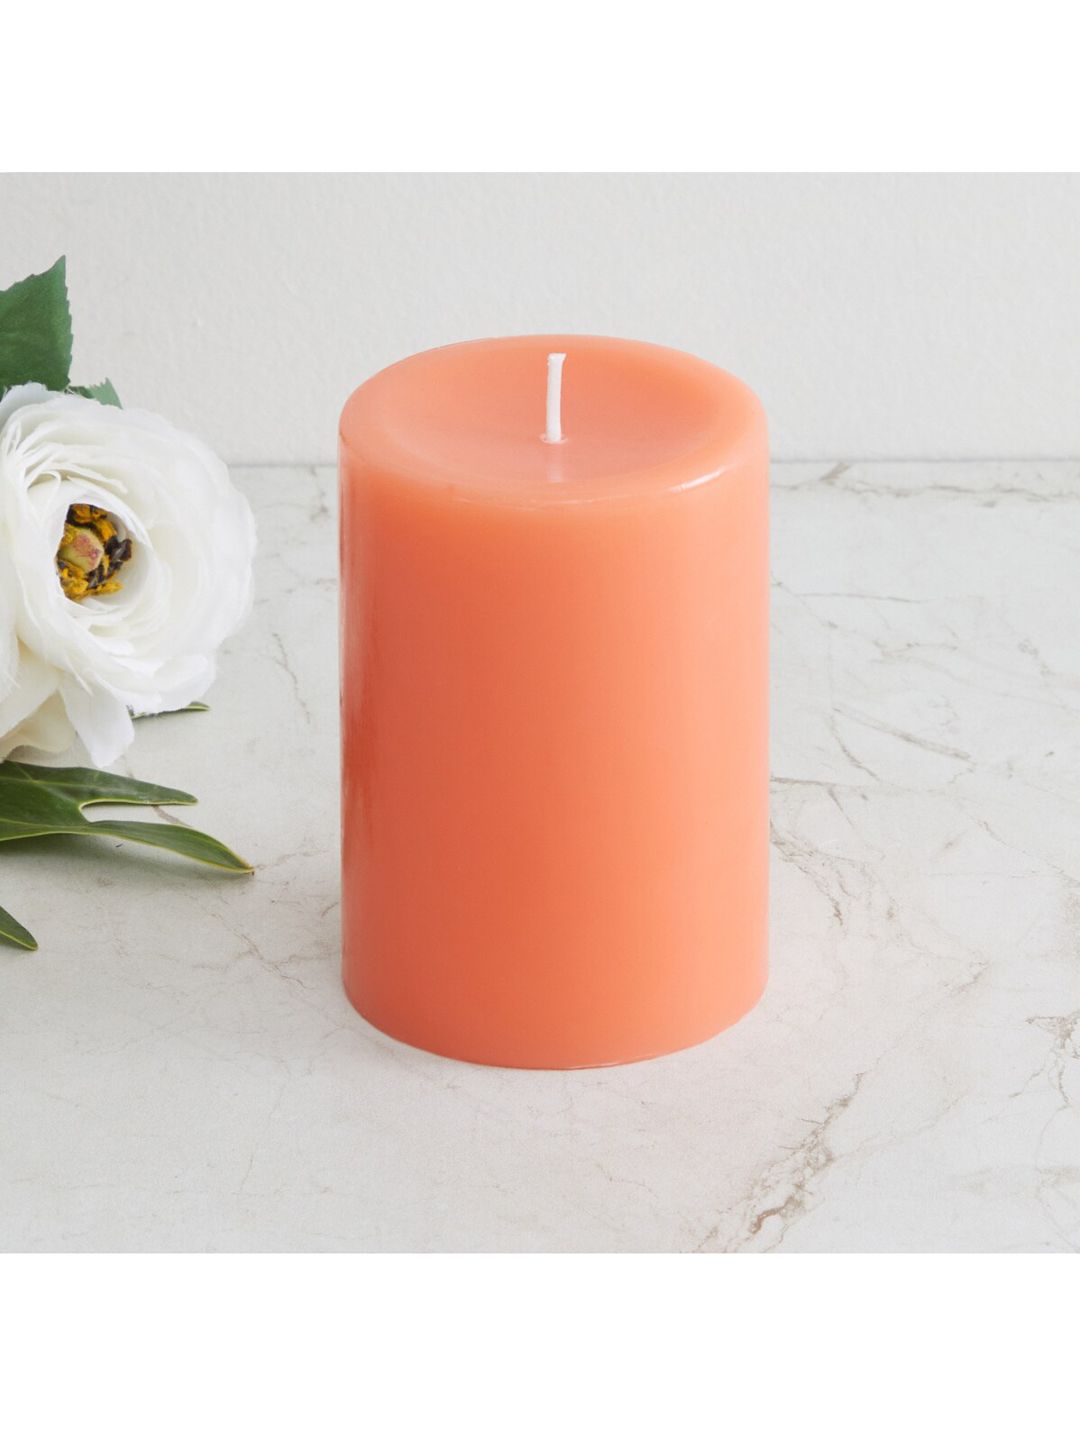 Home Centre Orange Solid Redolence Pillar Candle Price in India